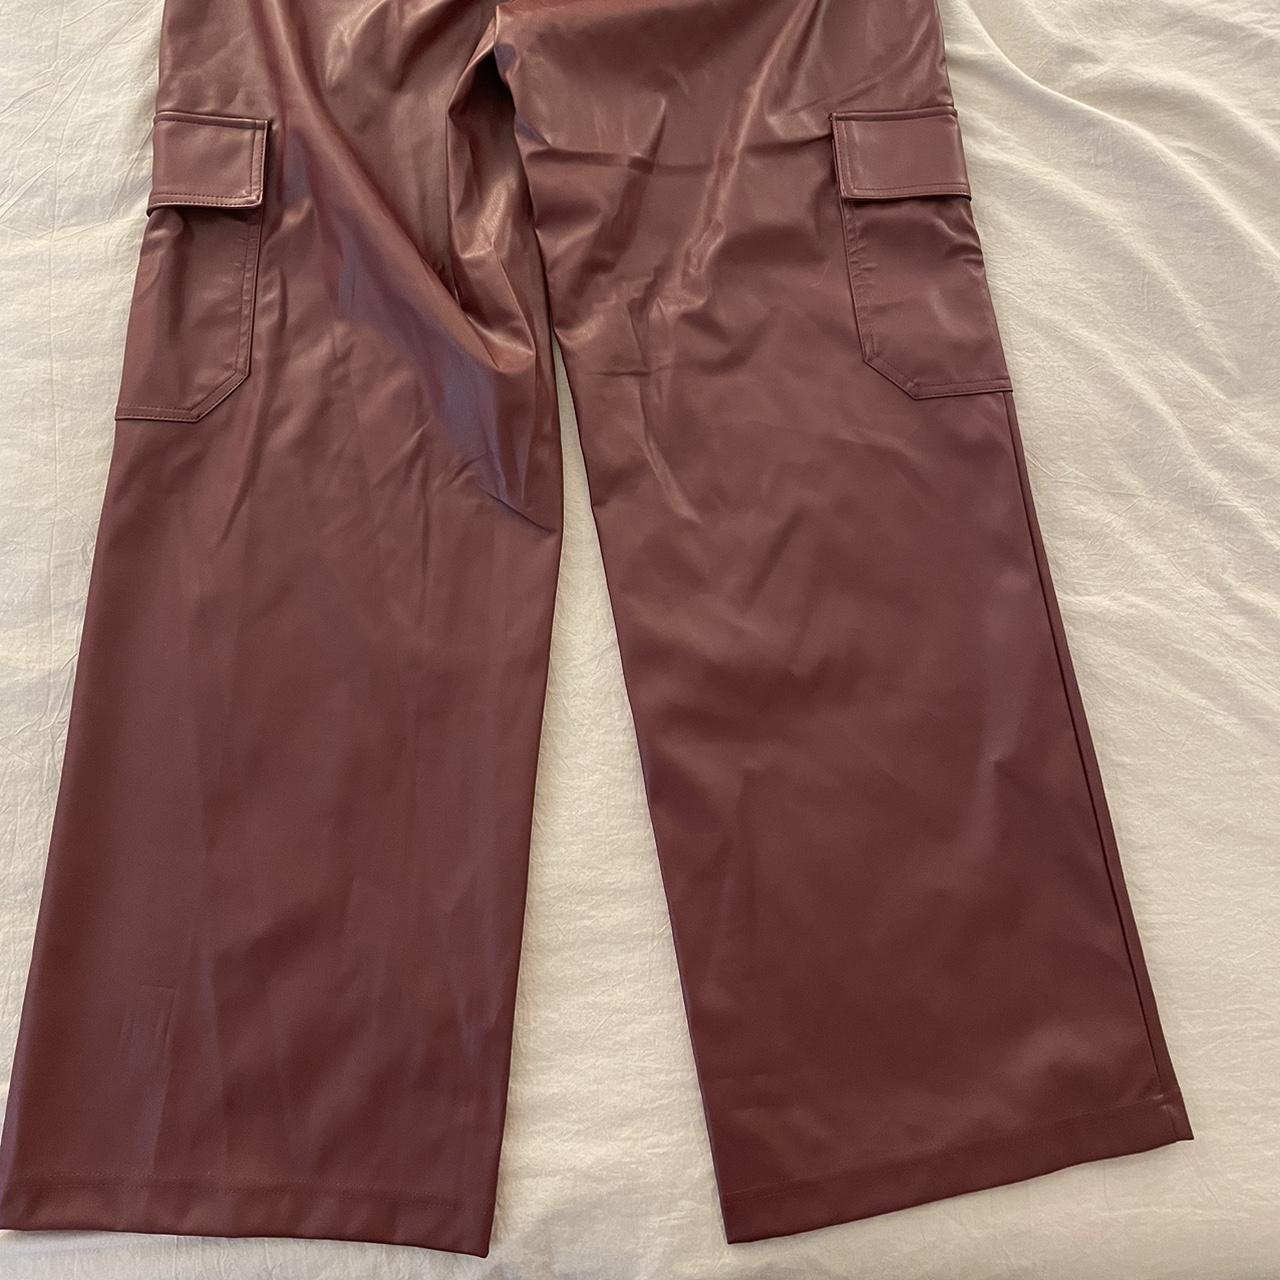 Wild Fable High-Waisted Faux Leather Burgundy - Depop